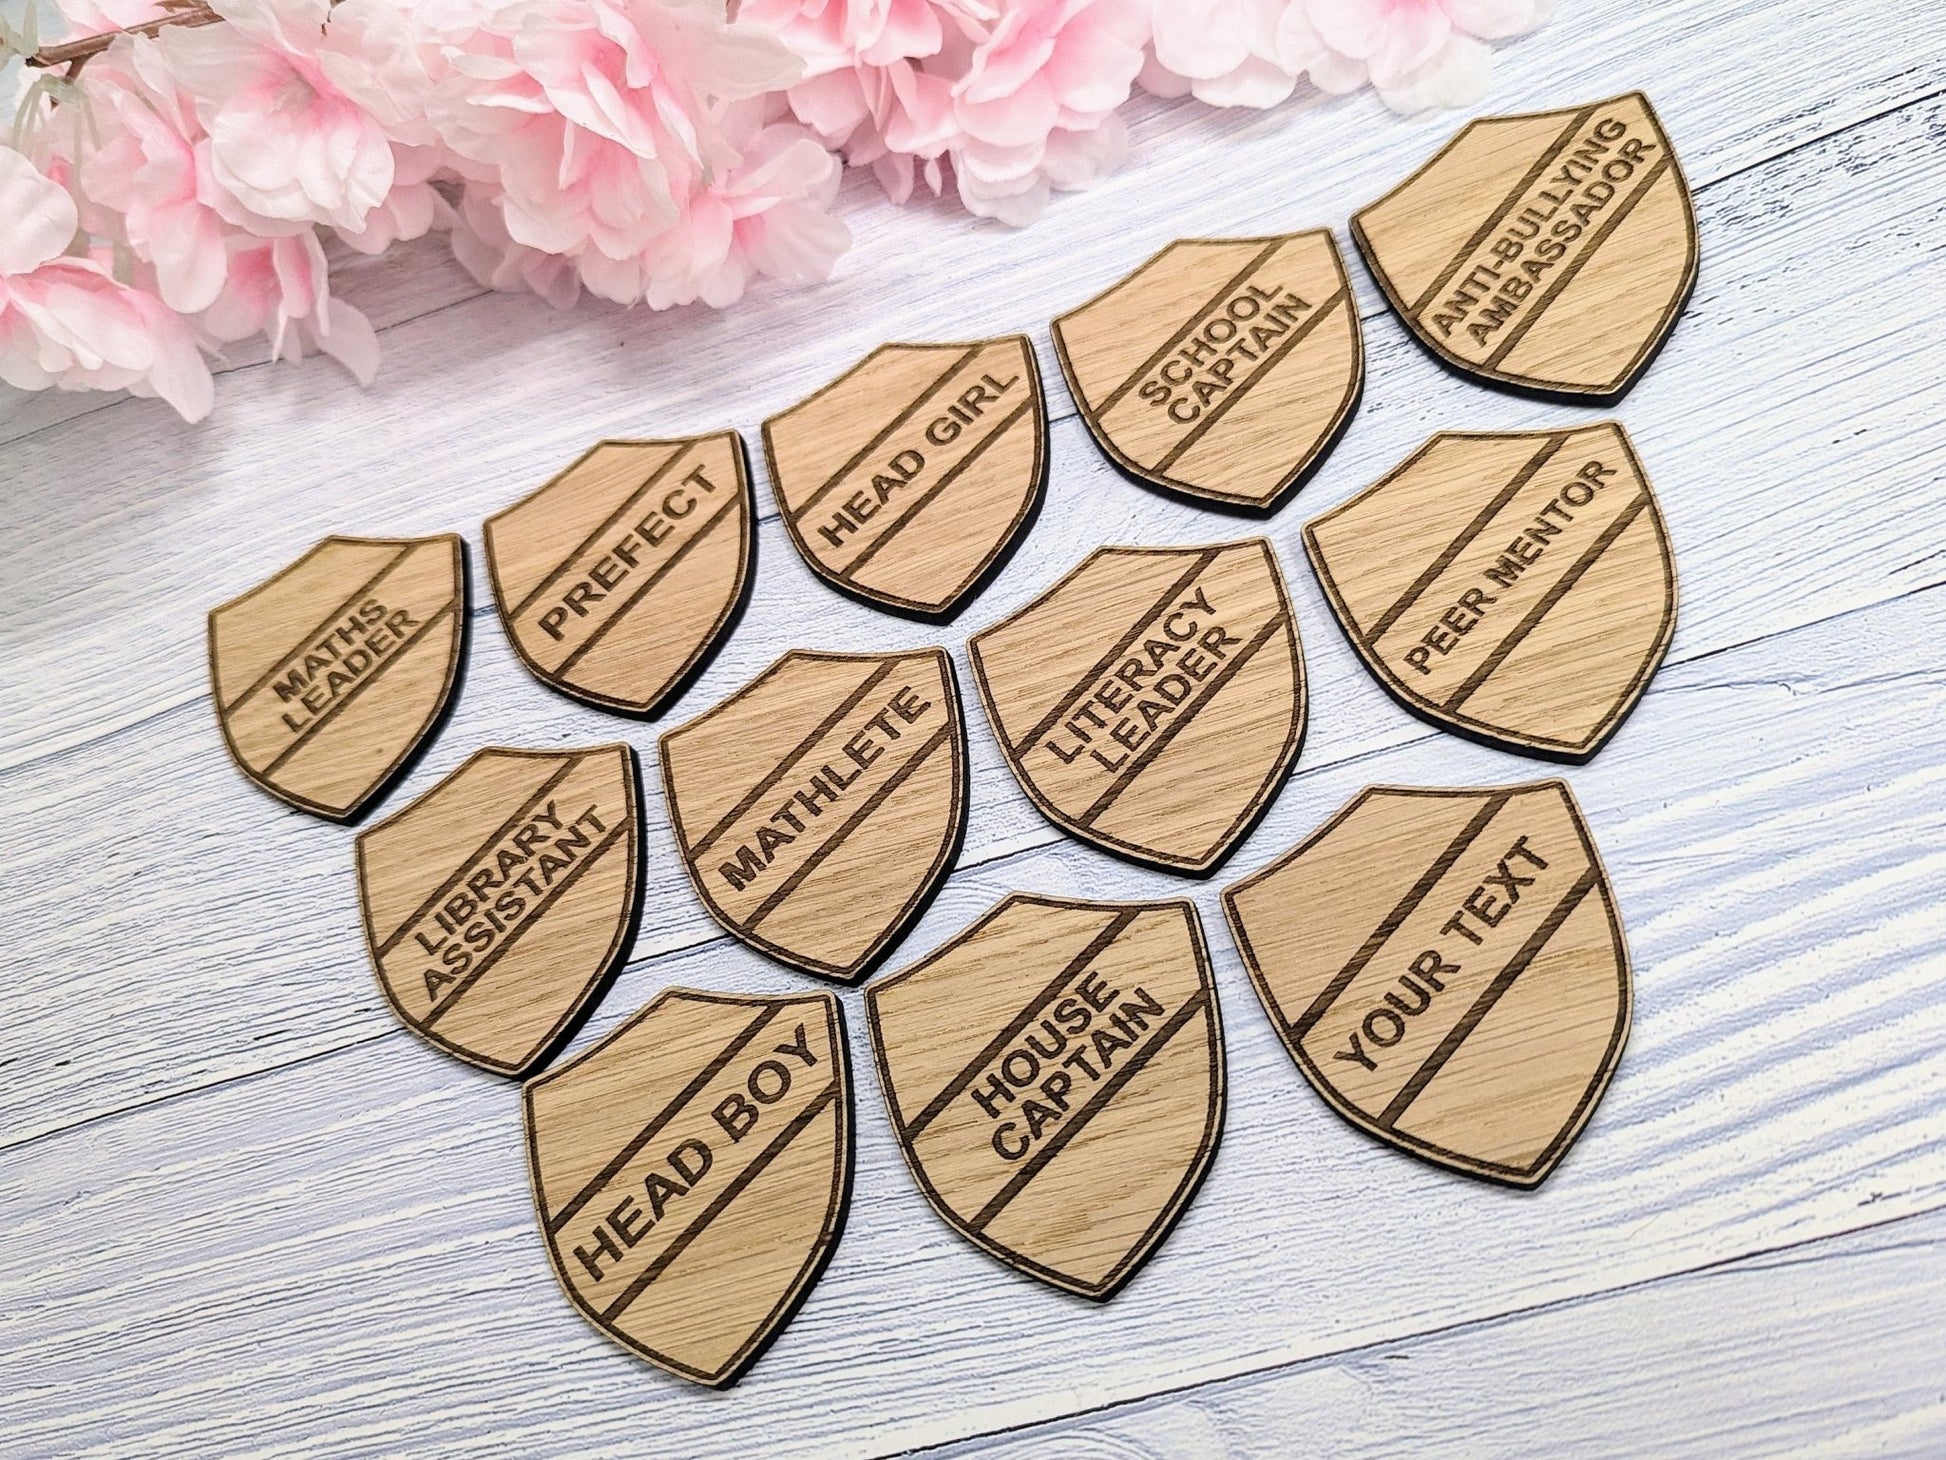 School Achievement Badges - 55x65mm - Oak Veneered MDF - Pin or Pin & Clip - Personalised or Pre-Designed Options for Students - CherryGroveCraft